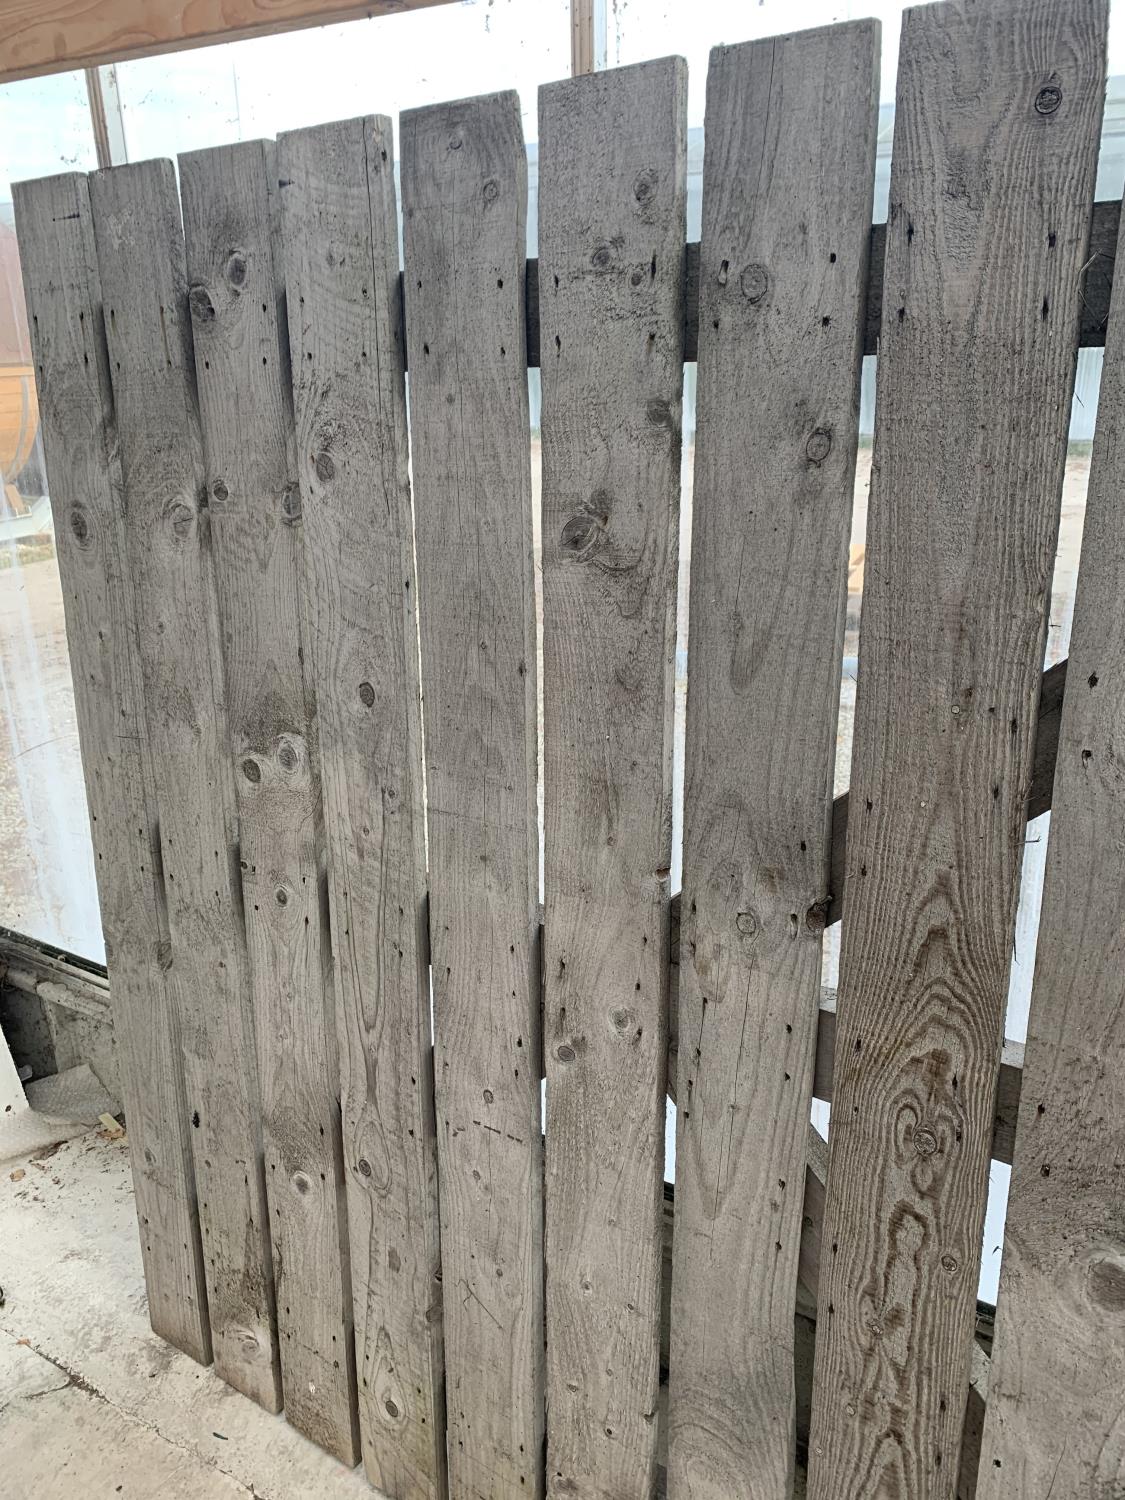 A VERY LARGE SLATTED WOODEN YARD GATE, WIDTH 182CM, HEIGHT 180CM - Image 4 of 4